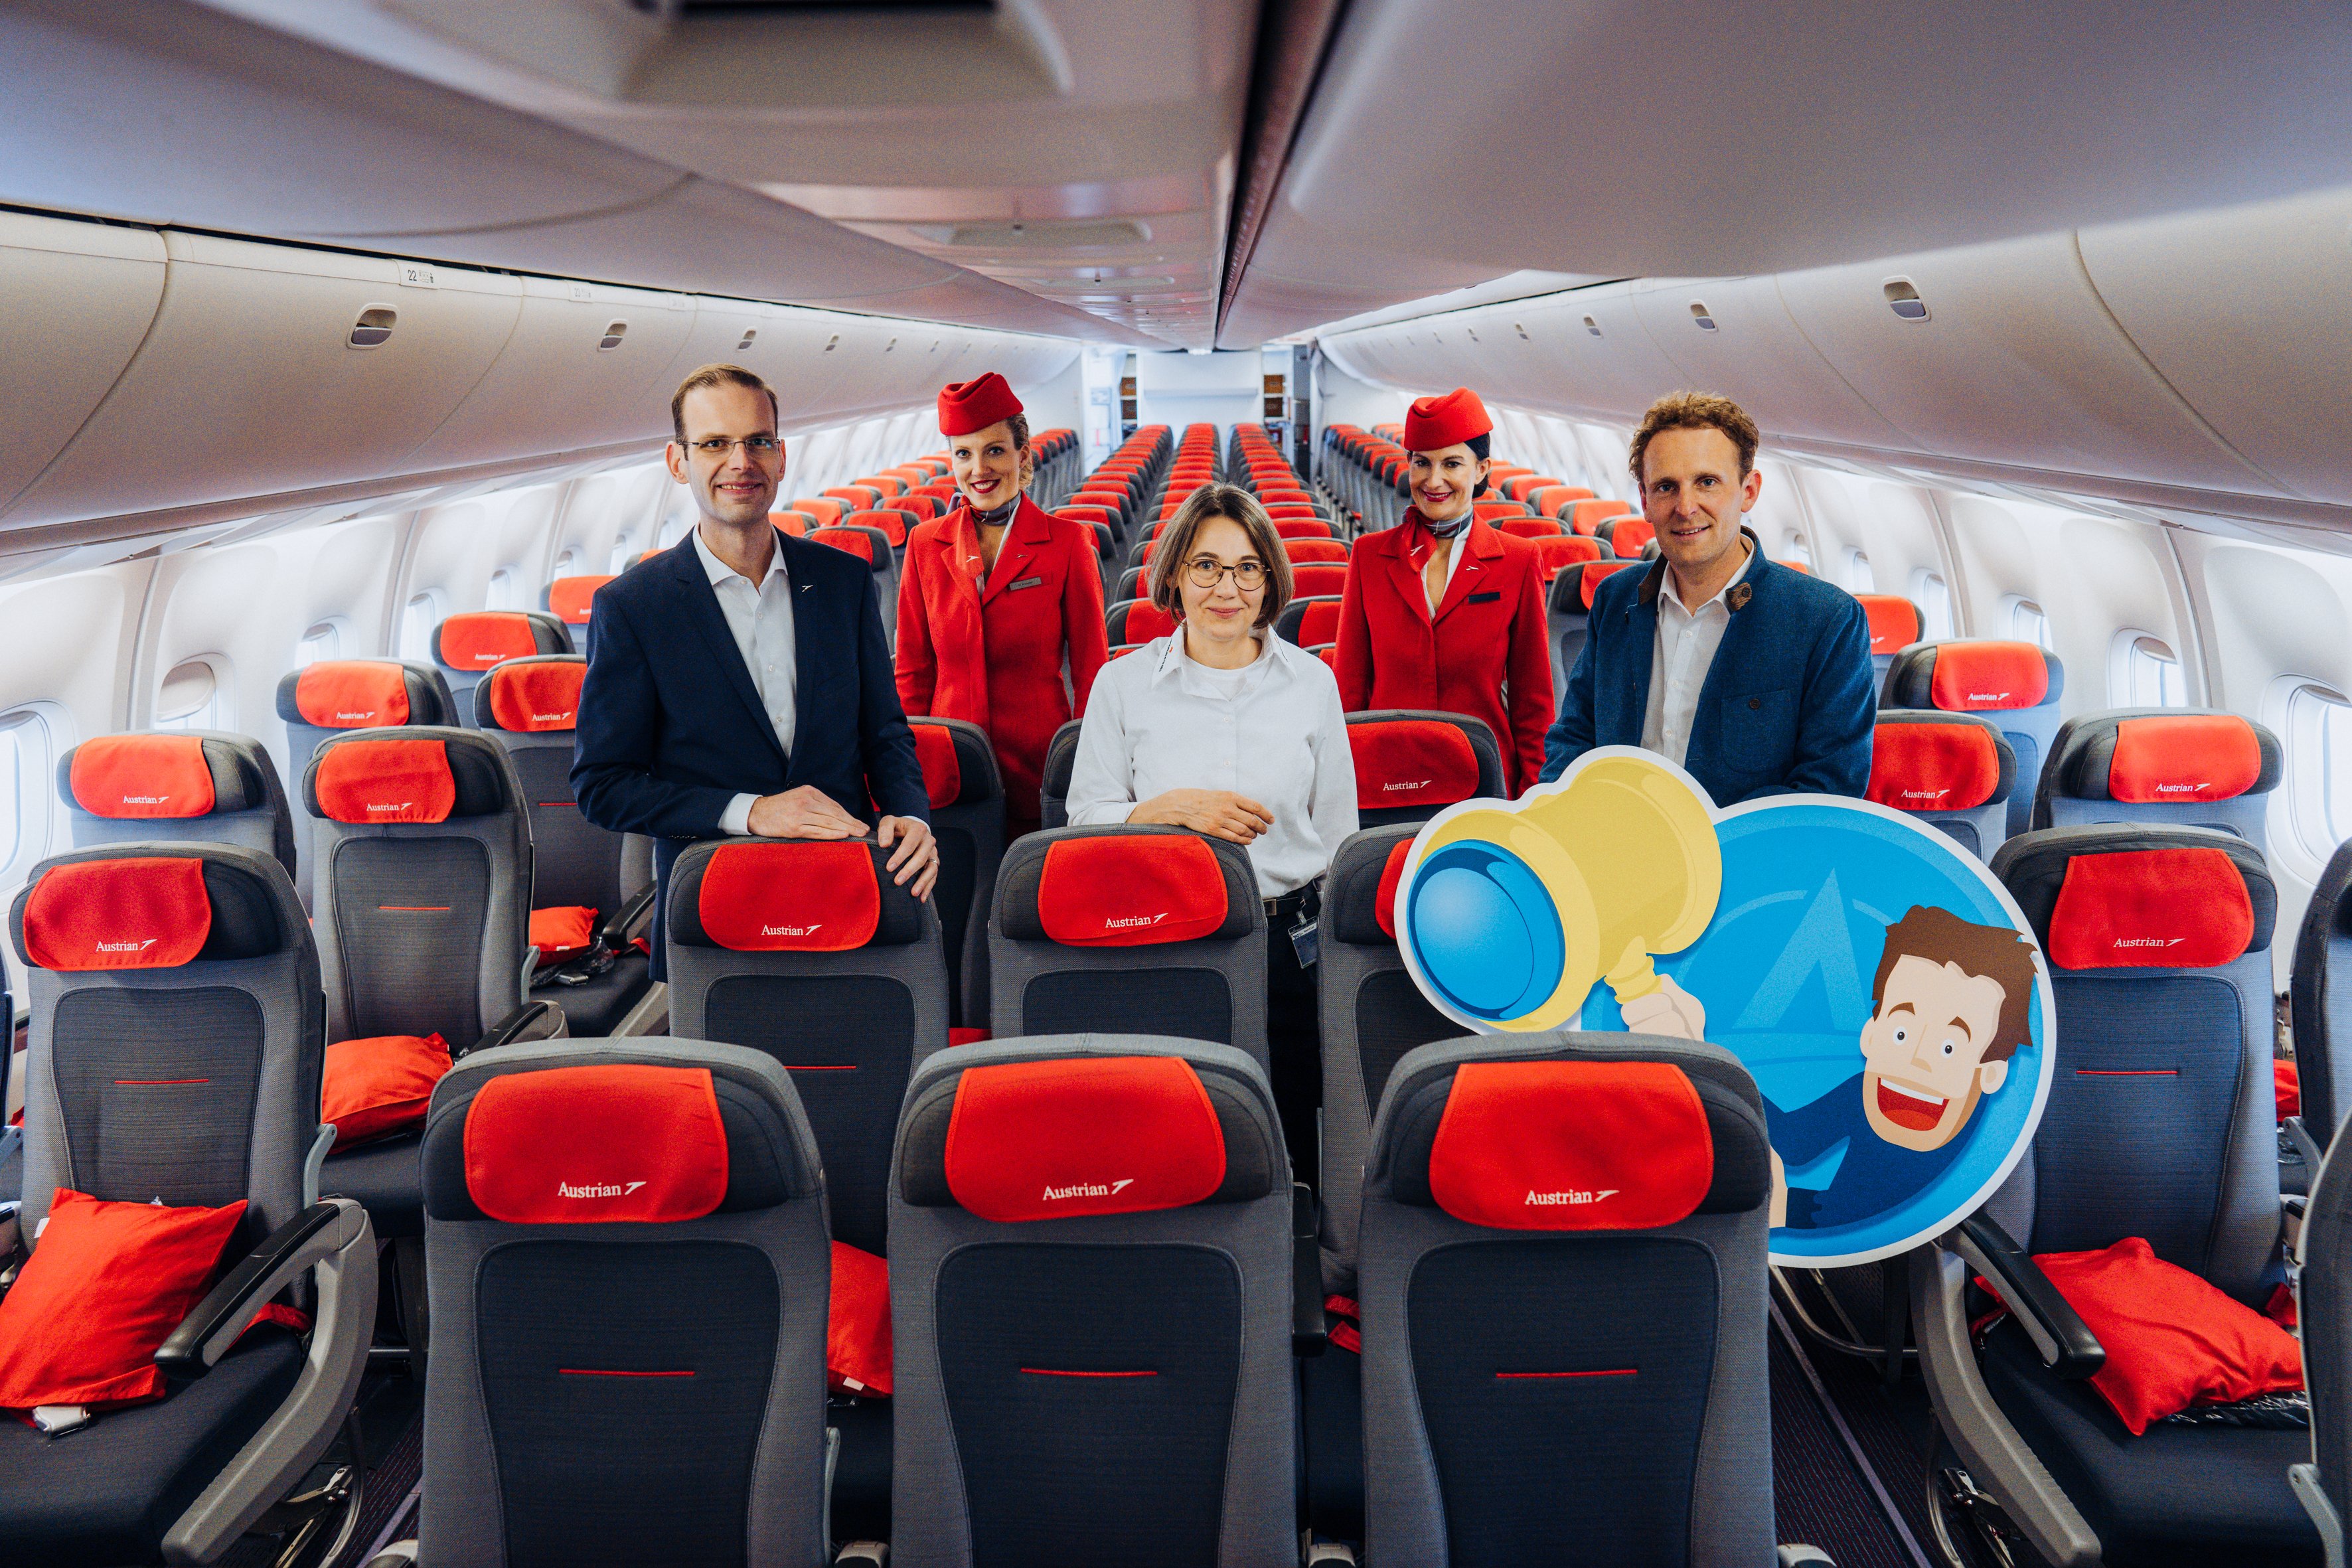 Austrian Airlines on Twitter: "Going once, going twice, aaaaaaaaaand: SOLD!  💯💺✈️Austrian Airlines auctioned no longer required Economy Class plane  seats, as well as more than 170 flight trolleys.🌎 With this charity  auction,